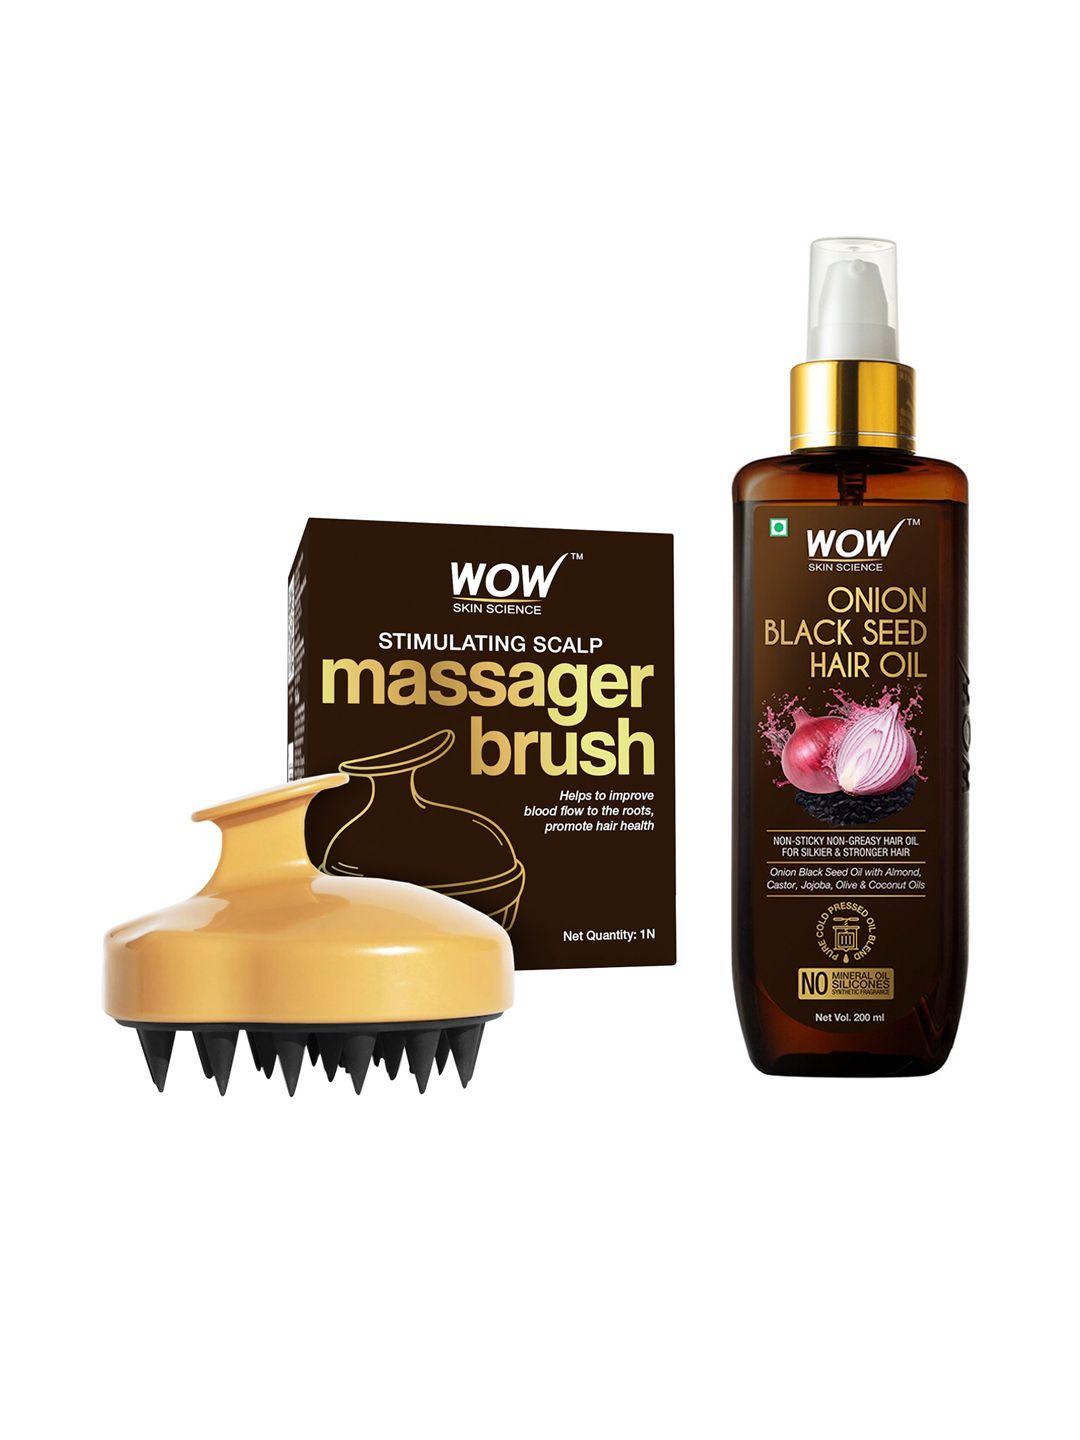 wow-skin-science-onion-hair-oil-200ml-with-stimulating-scalp-massager-hair-brush